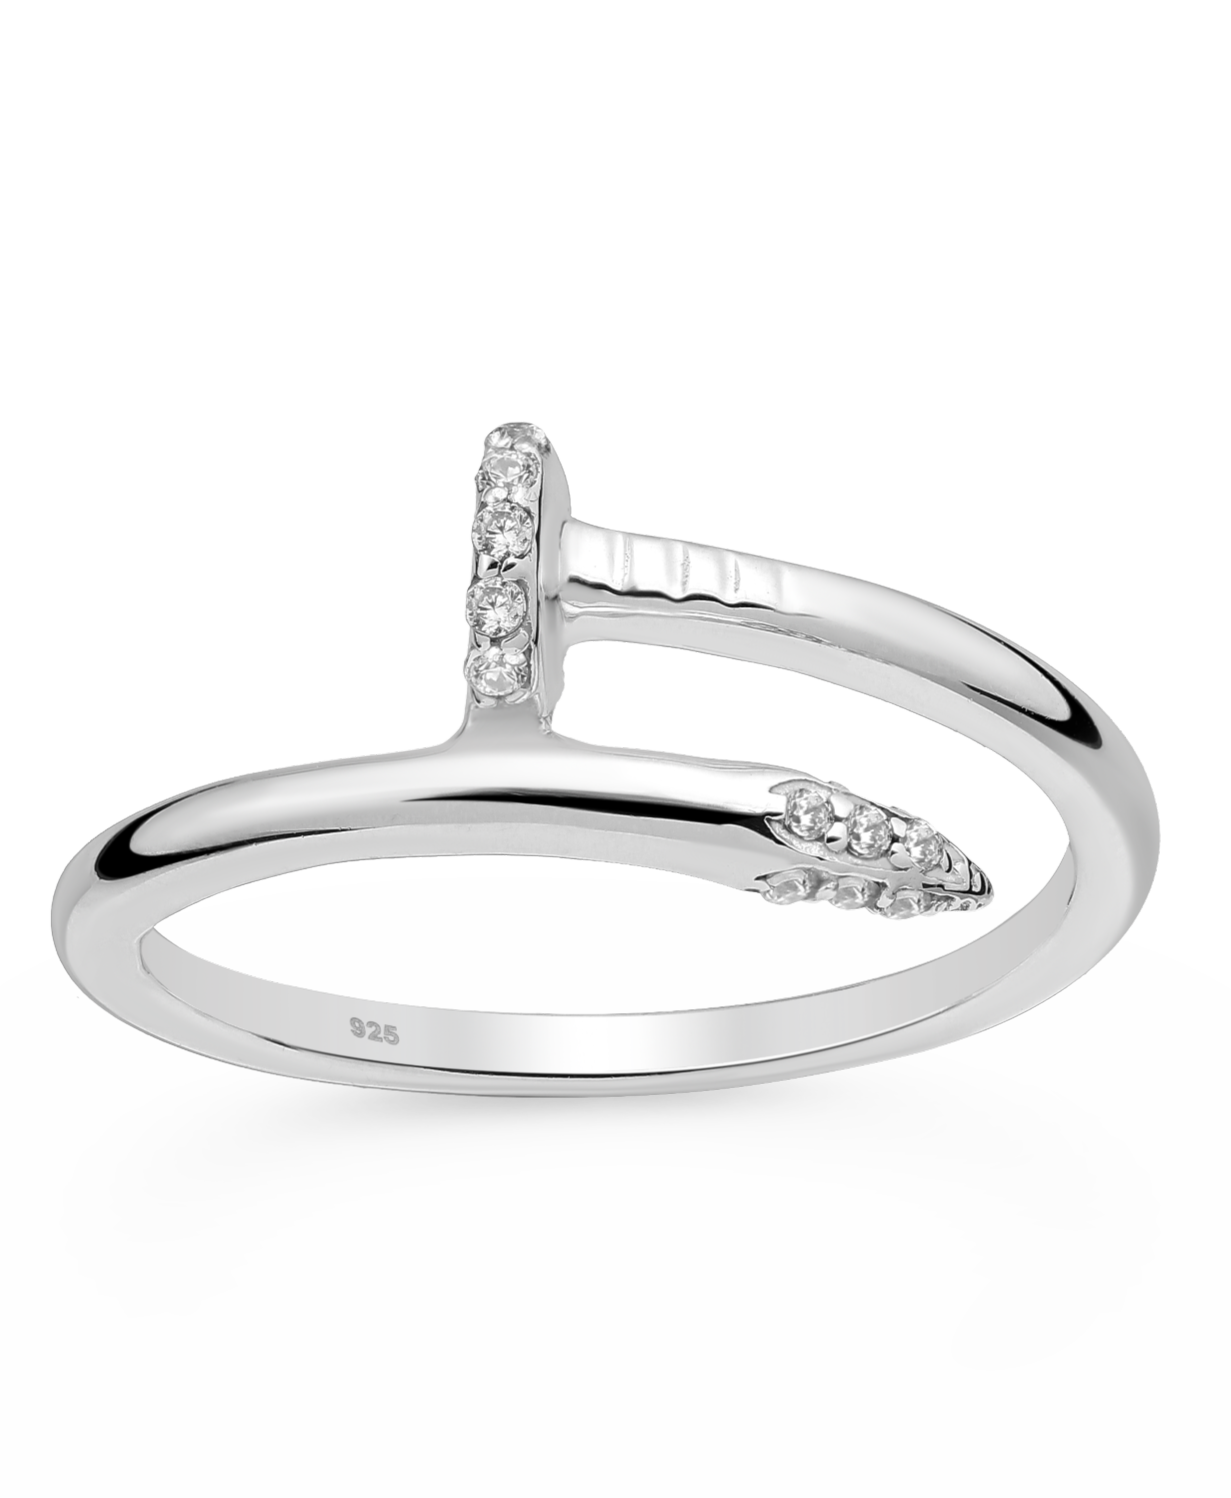 Sterling Silver Nail Ring with CZ Stimulated Diamonds